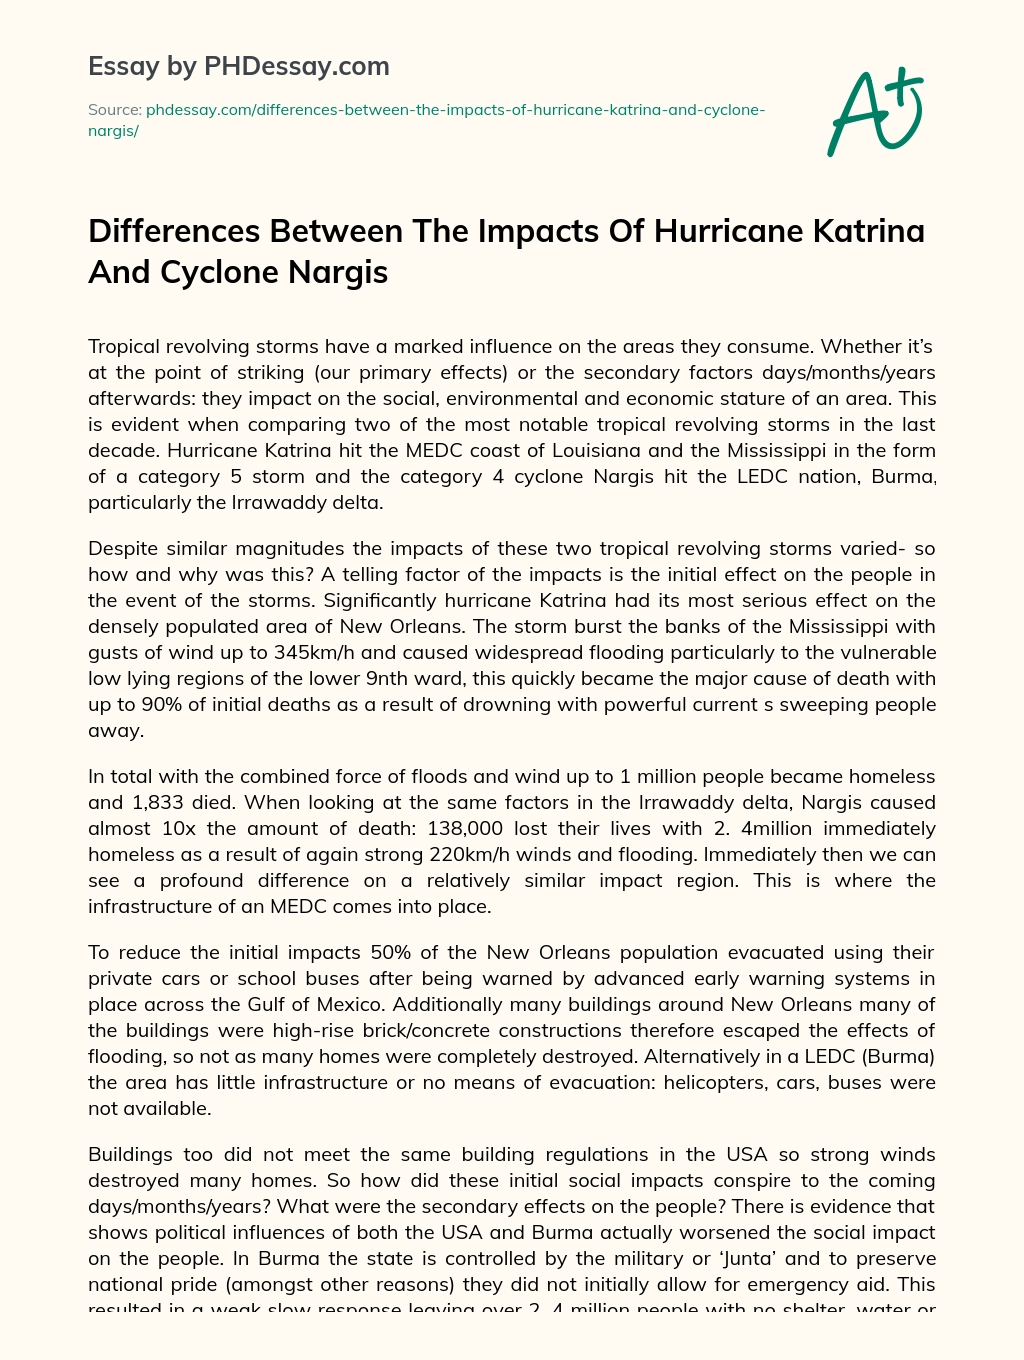 Differences Between The Impacts Of Hurricane Katrina And Cyclone Nargis essay